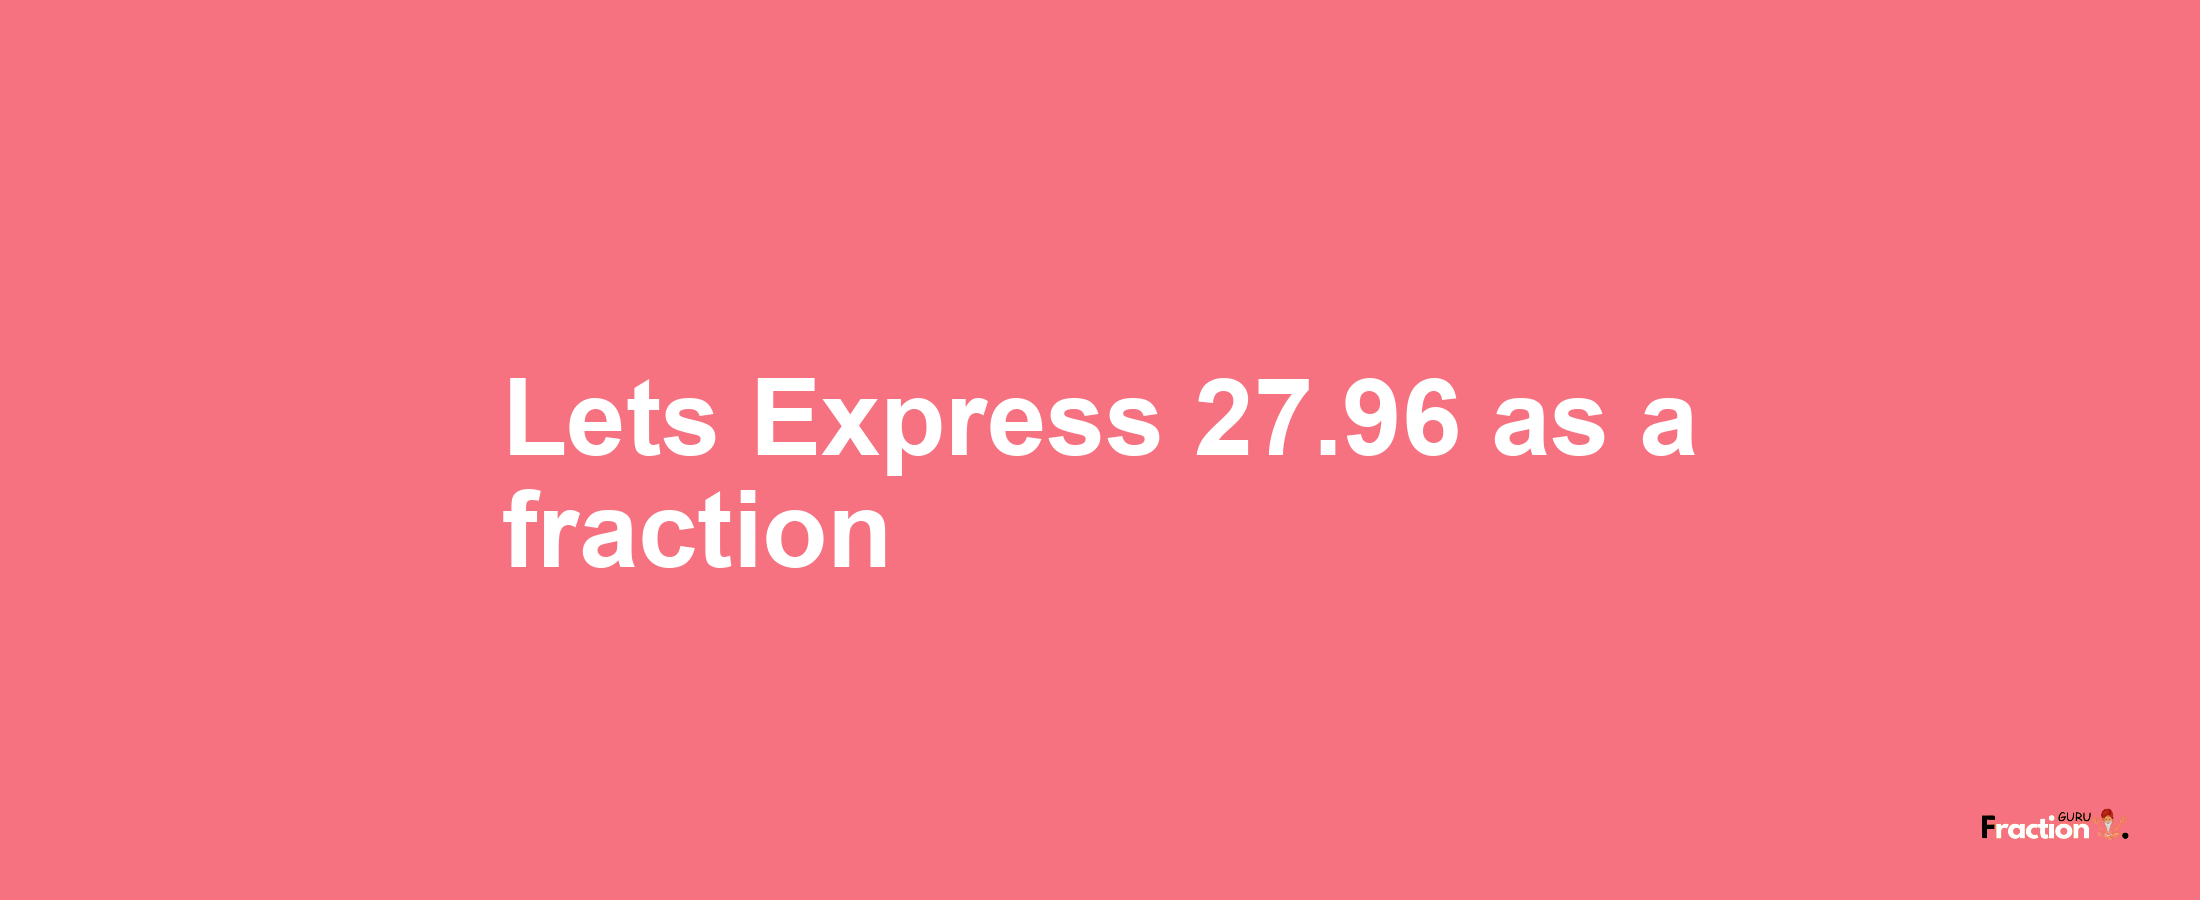 Lets Express 27.96 as afraction